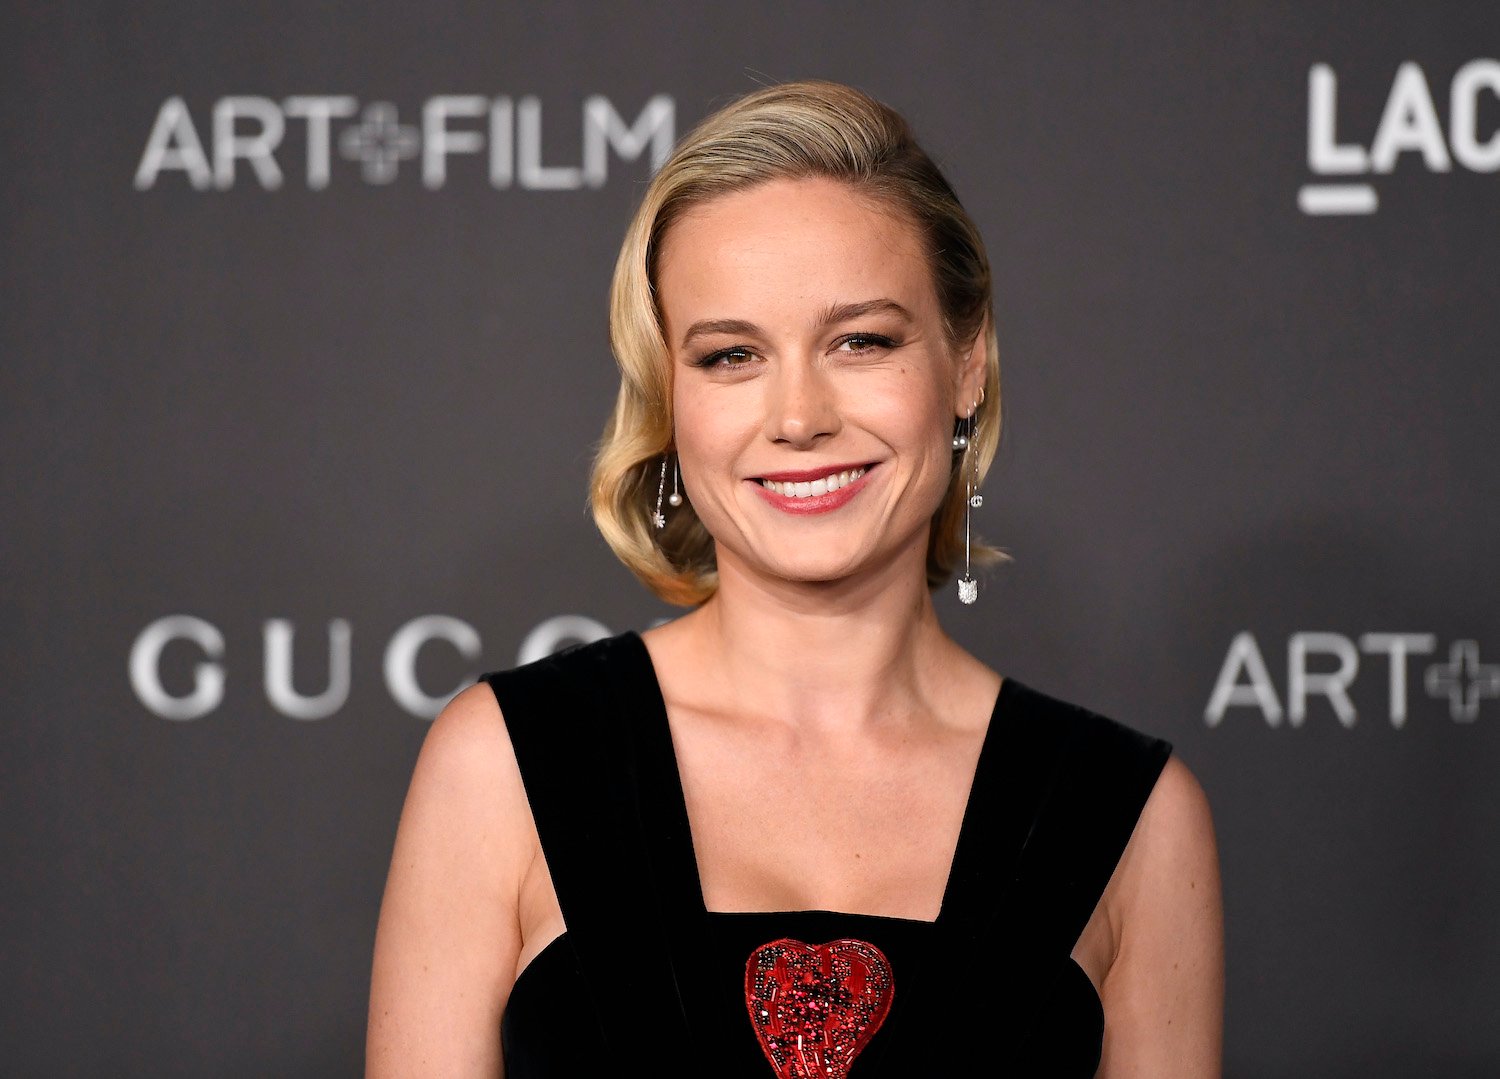 Brie Larson Revealed She Struggled With Feeling Ugly And Like An Outcast